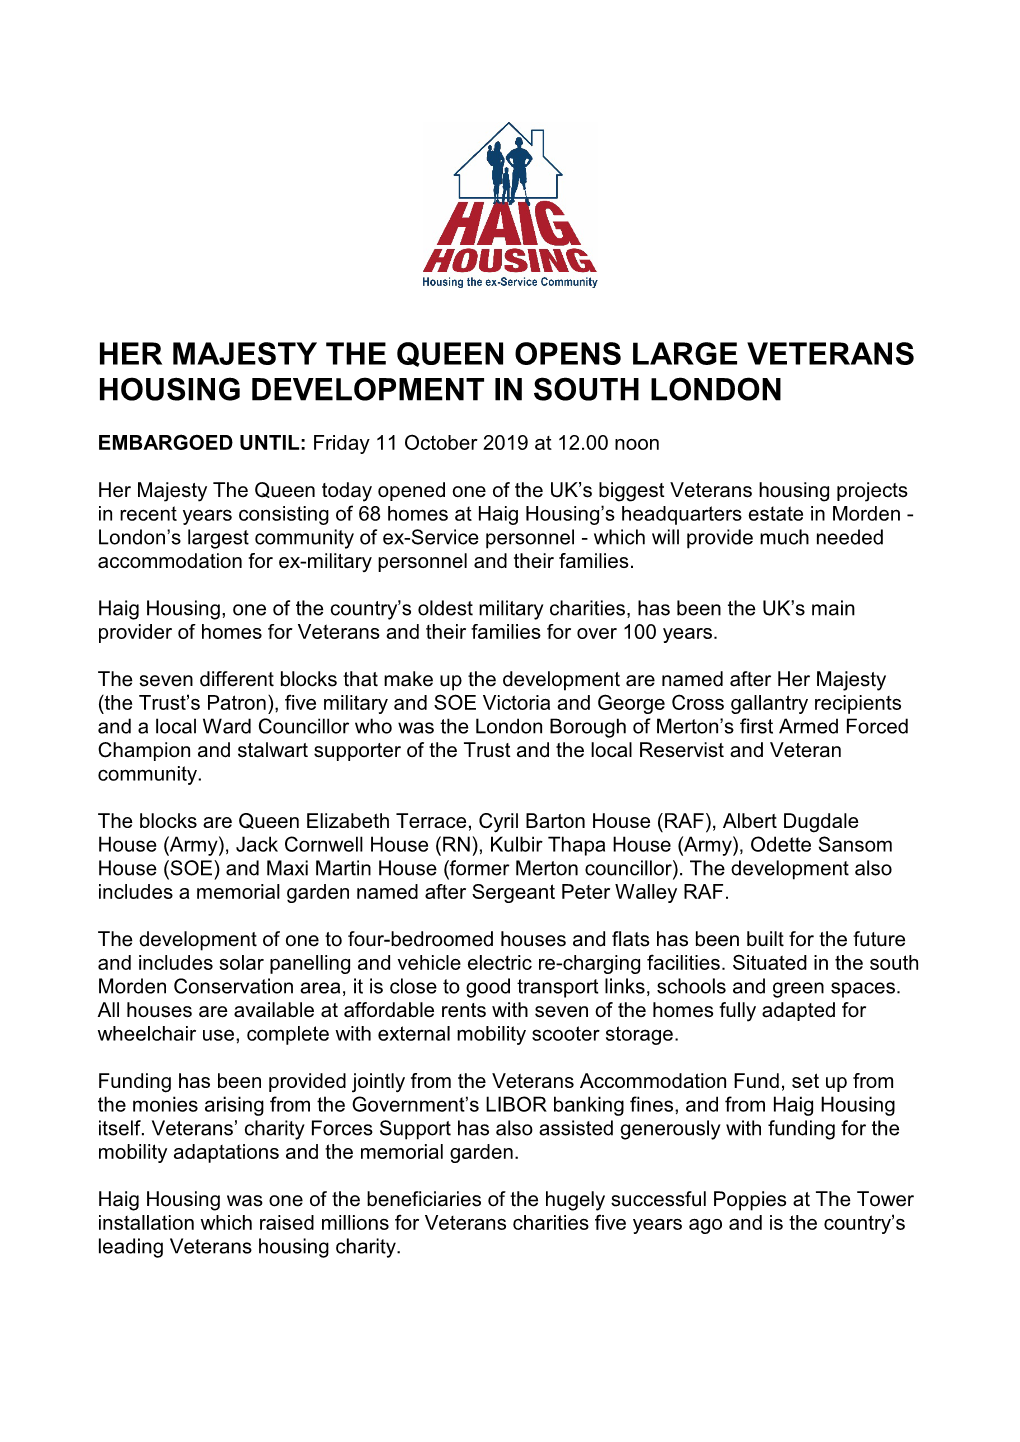 Her Majesty the Queen Opens Large Veterans Housing Development in South London